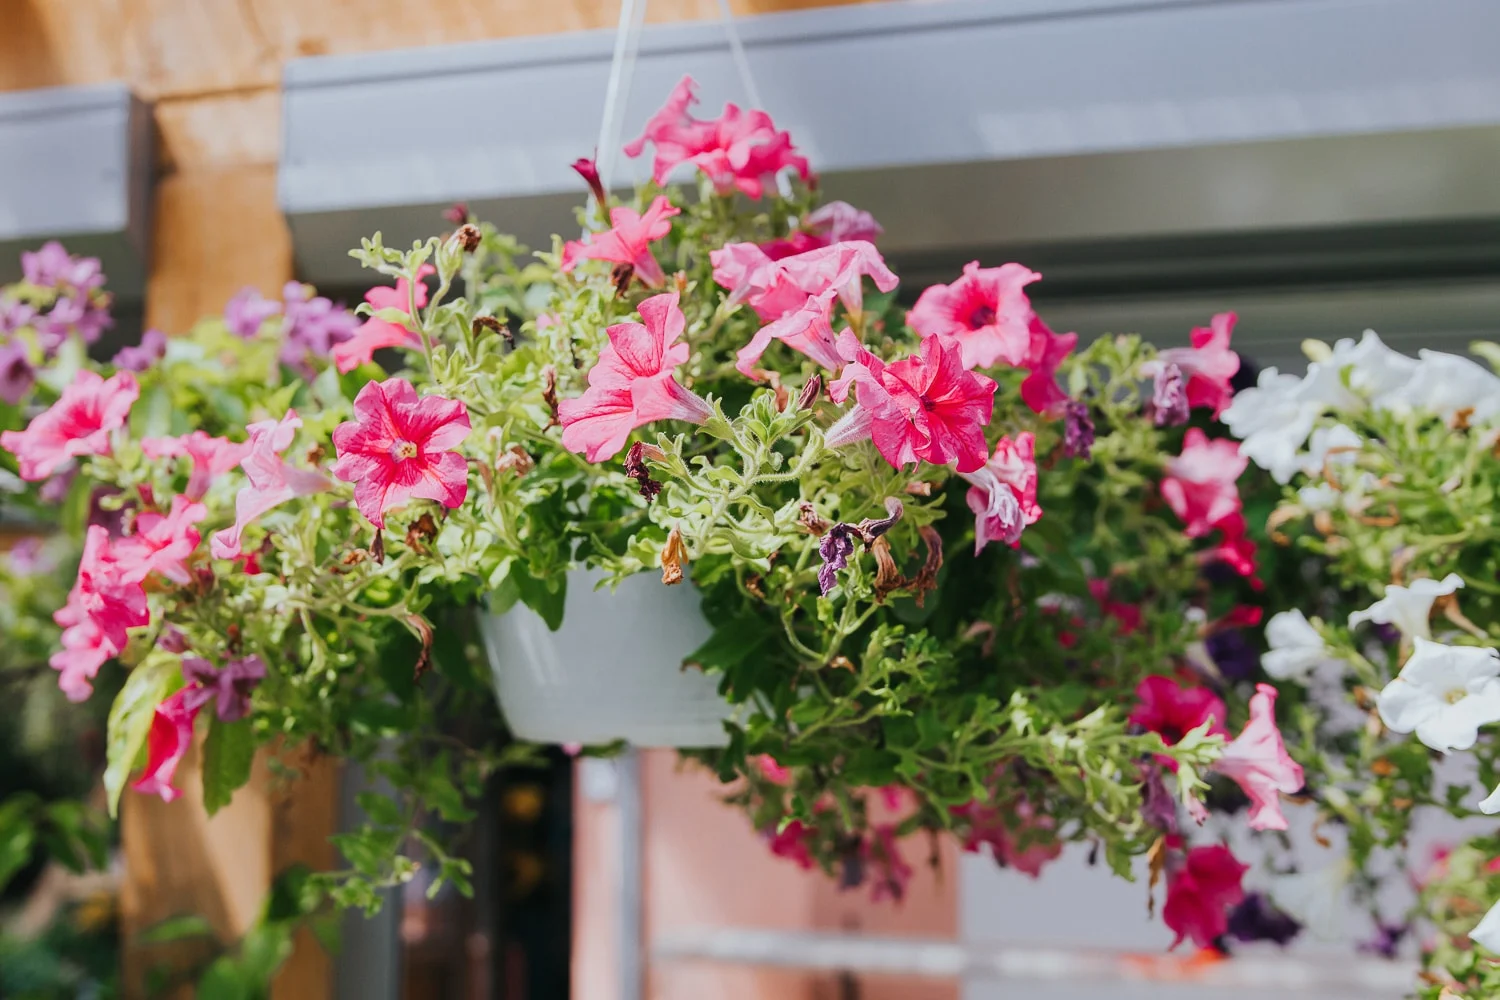 How To Deadhead Petunias In Hanging Baskets